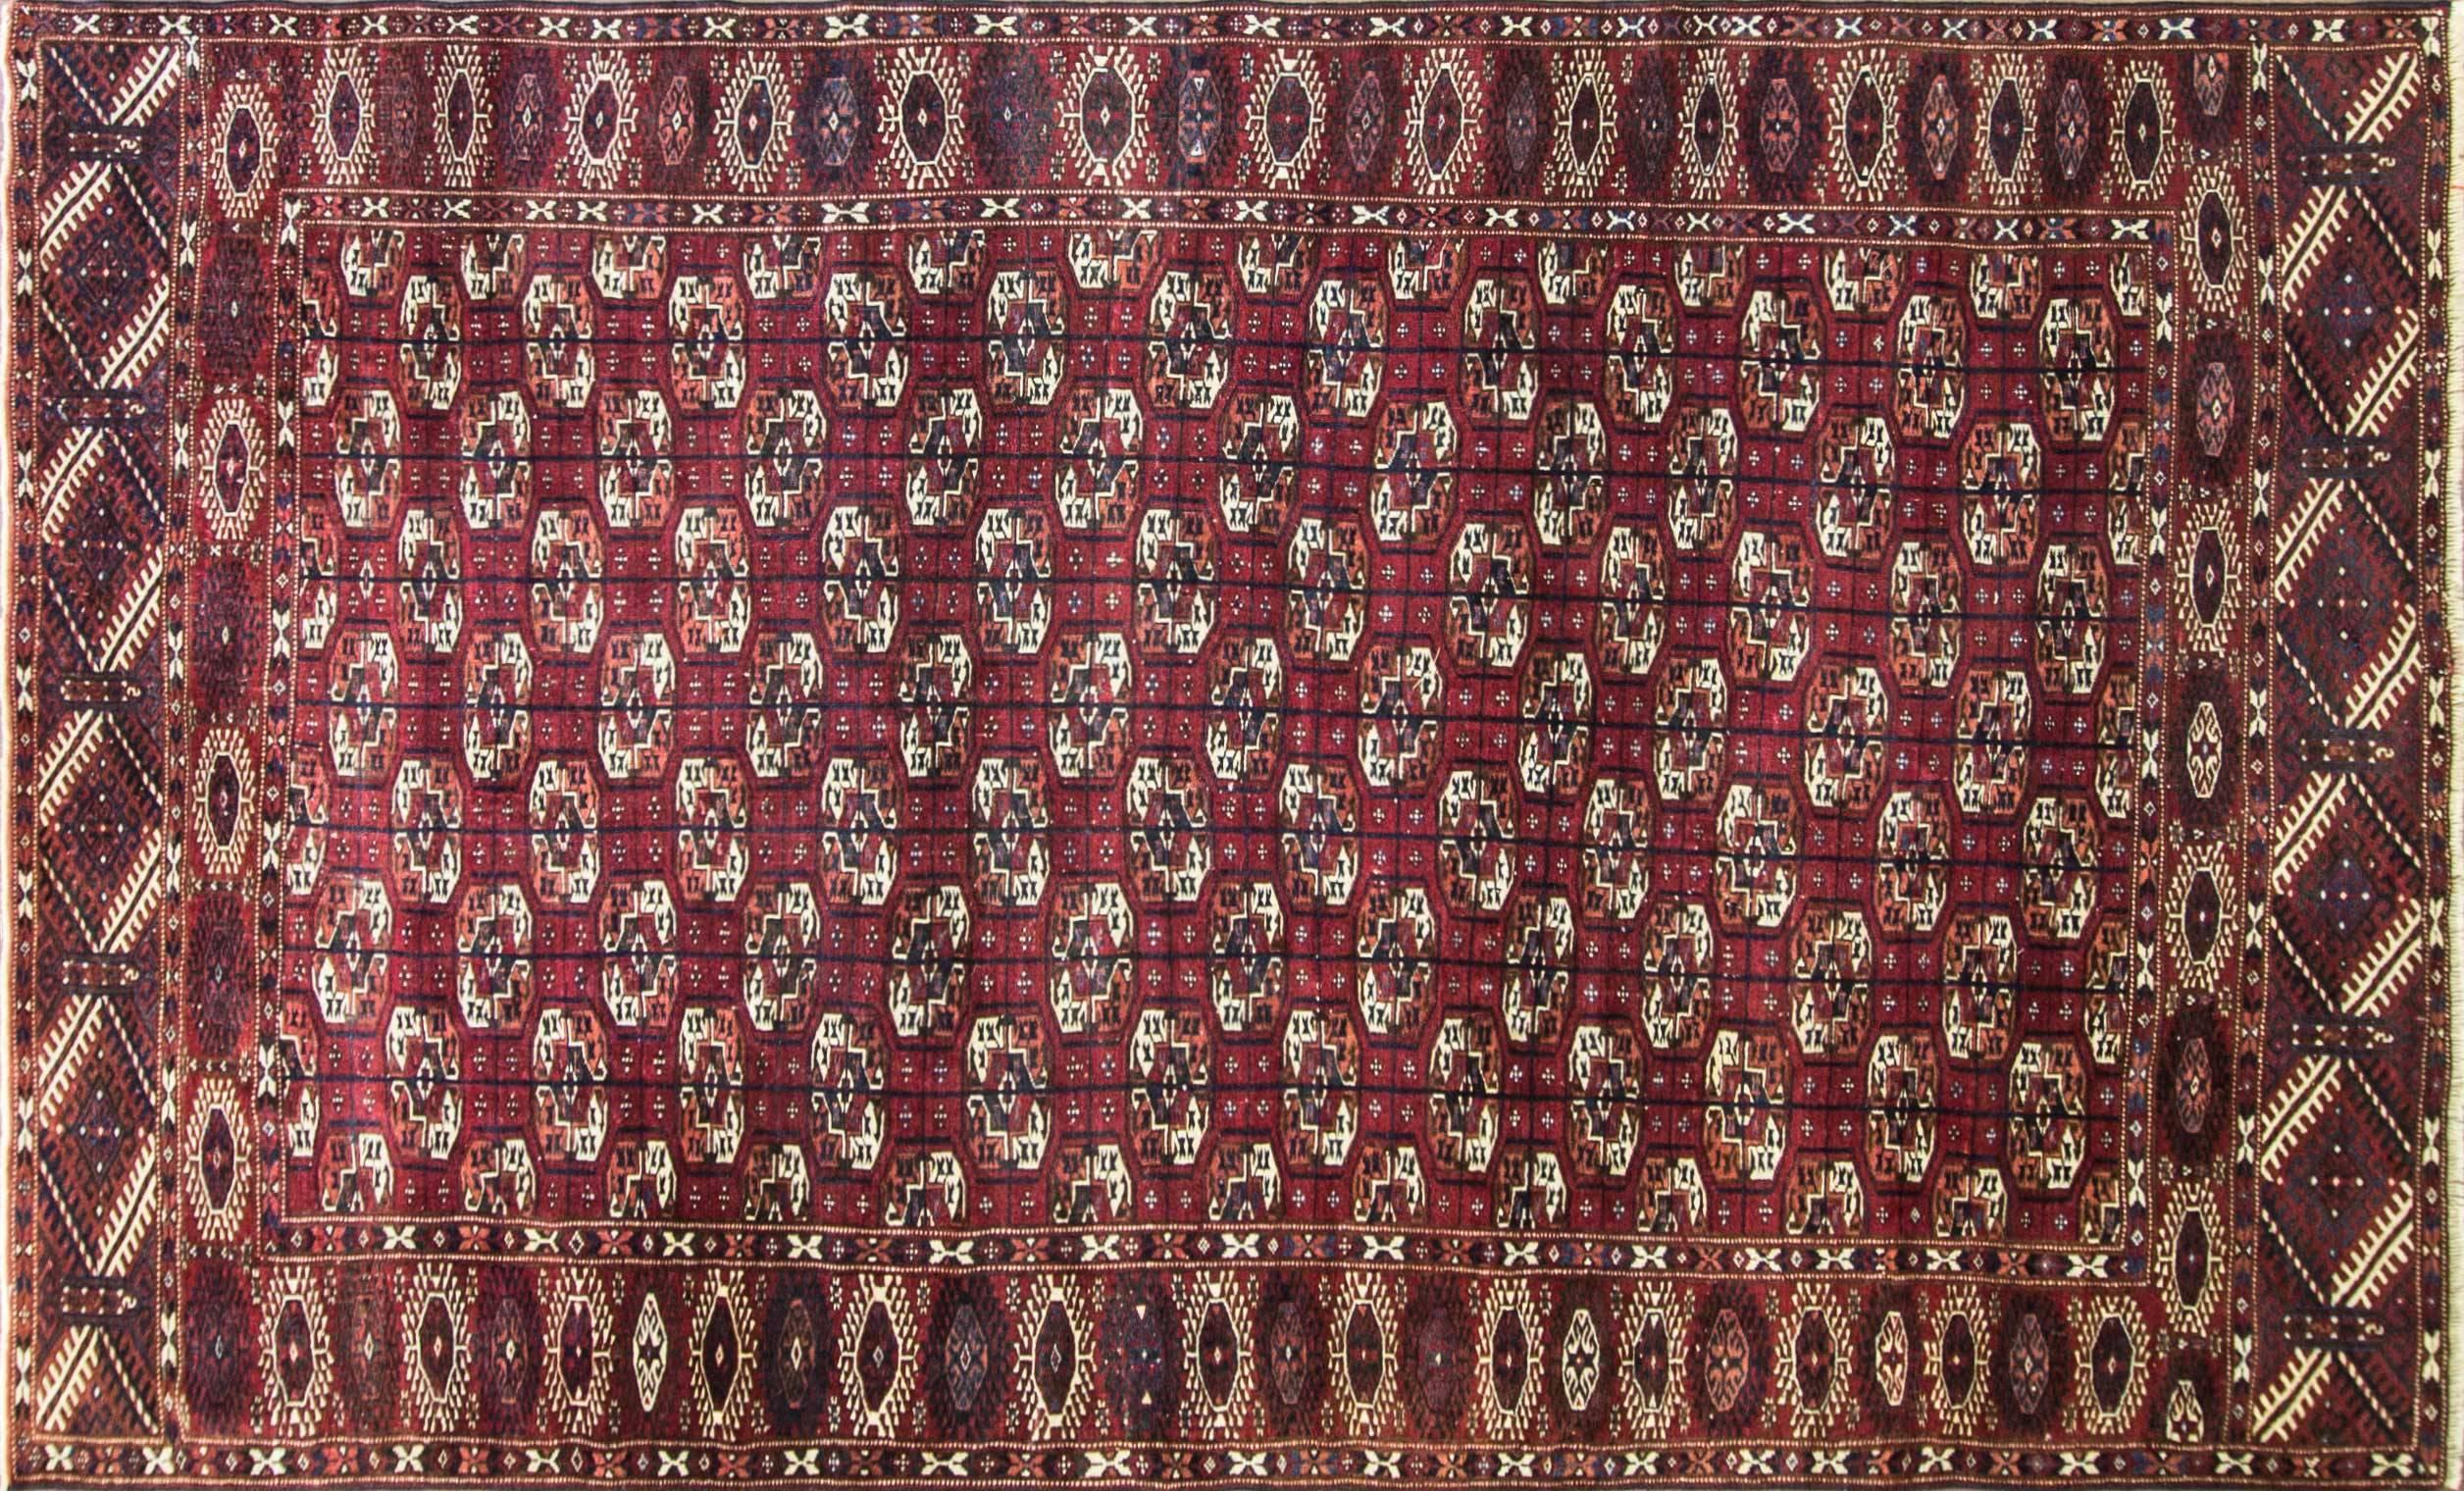 Turkoman carpet, Persia, circa 1950, vegetable dye wool pile on wool foundation.
Made by Turkoman tribe that originated from central Asia. The design of this carpet is Tekke which is the sub Turkoman tribe.
A few centuries back, almost all Turkmen